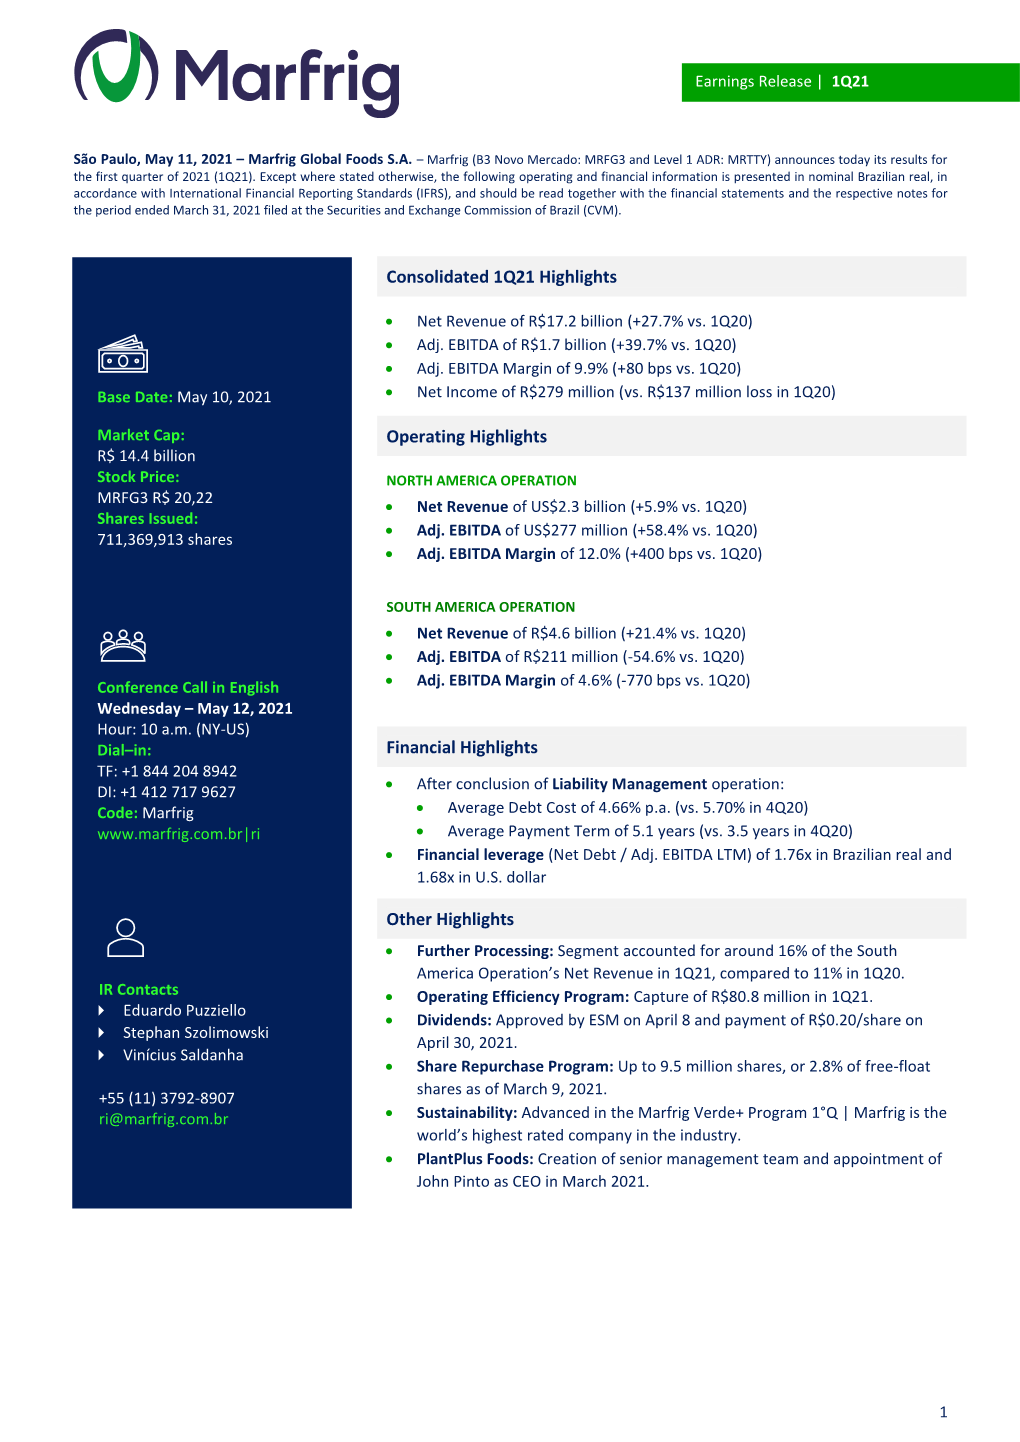 Consolidated 1Q21 Highlights Operating Highlights Financial Highlights Other Highlights